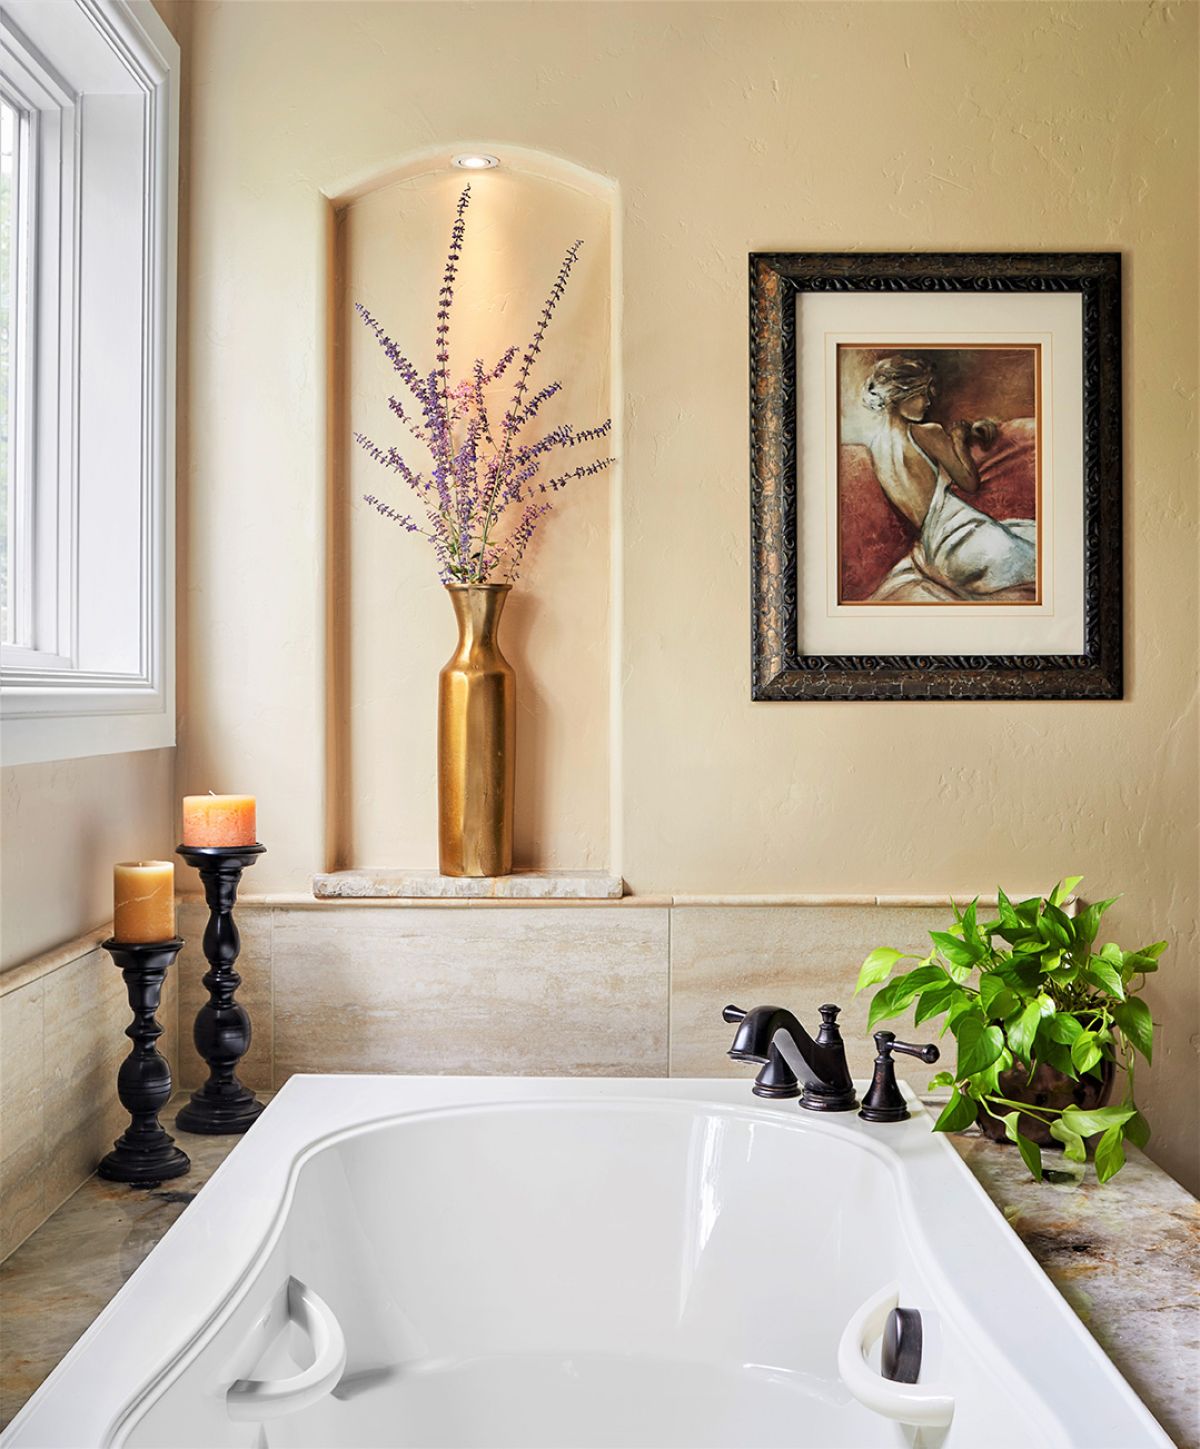 POV of luxury bath tub with candles, vase, and artwork.